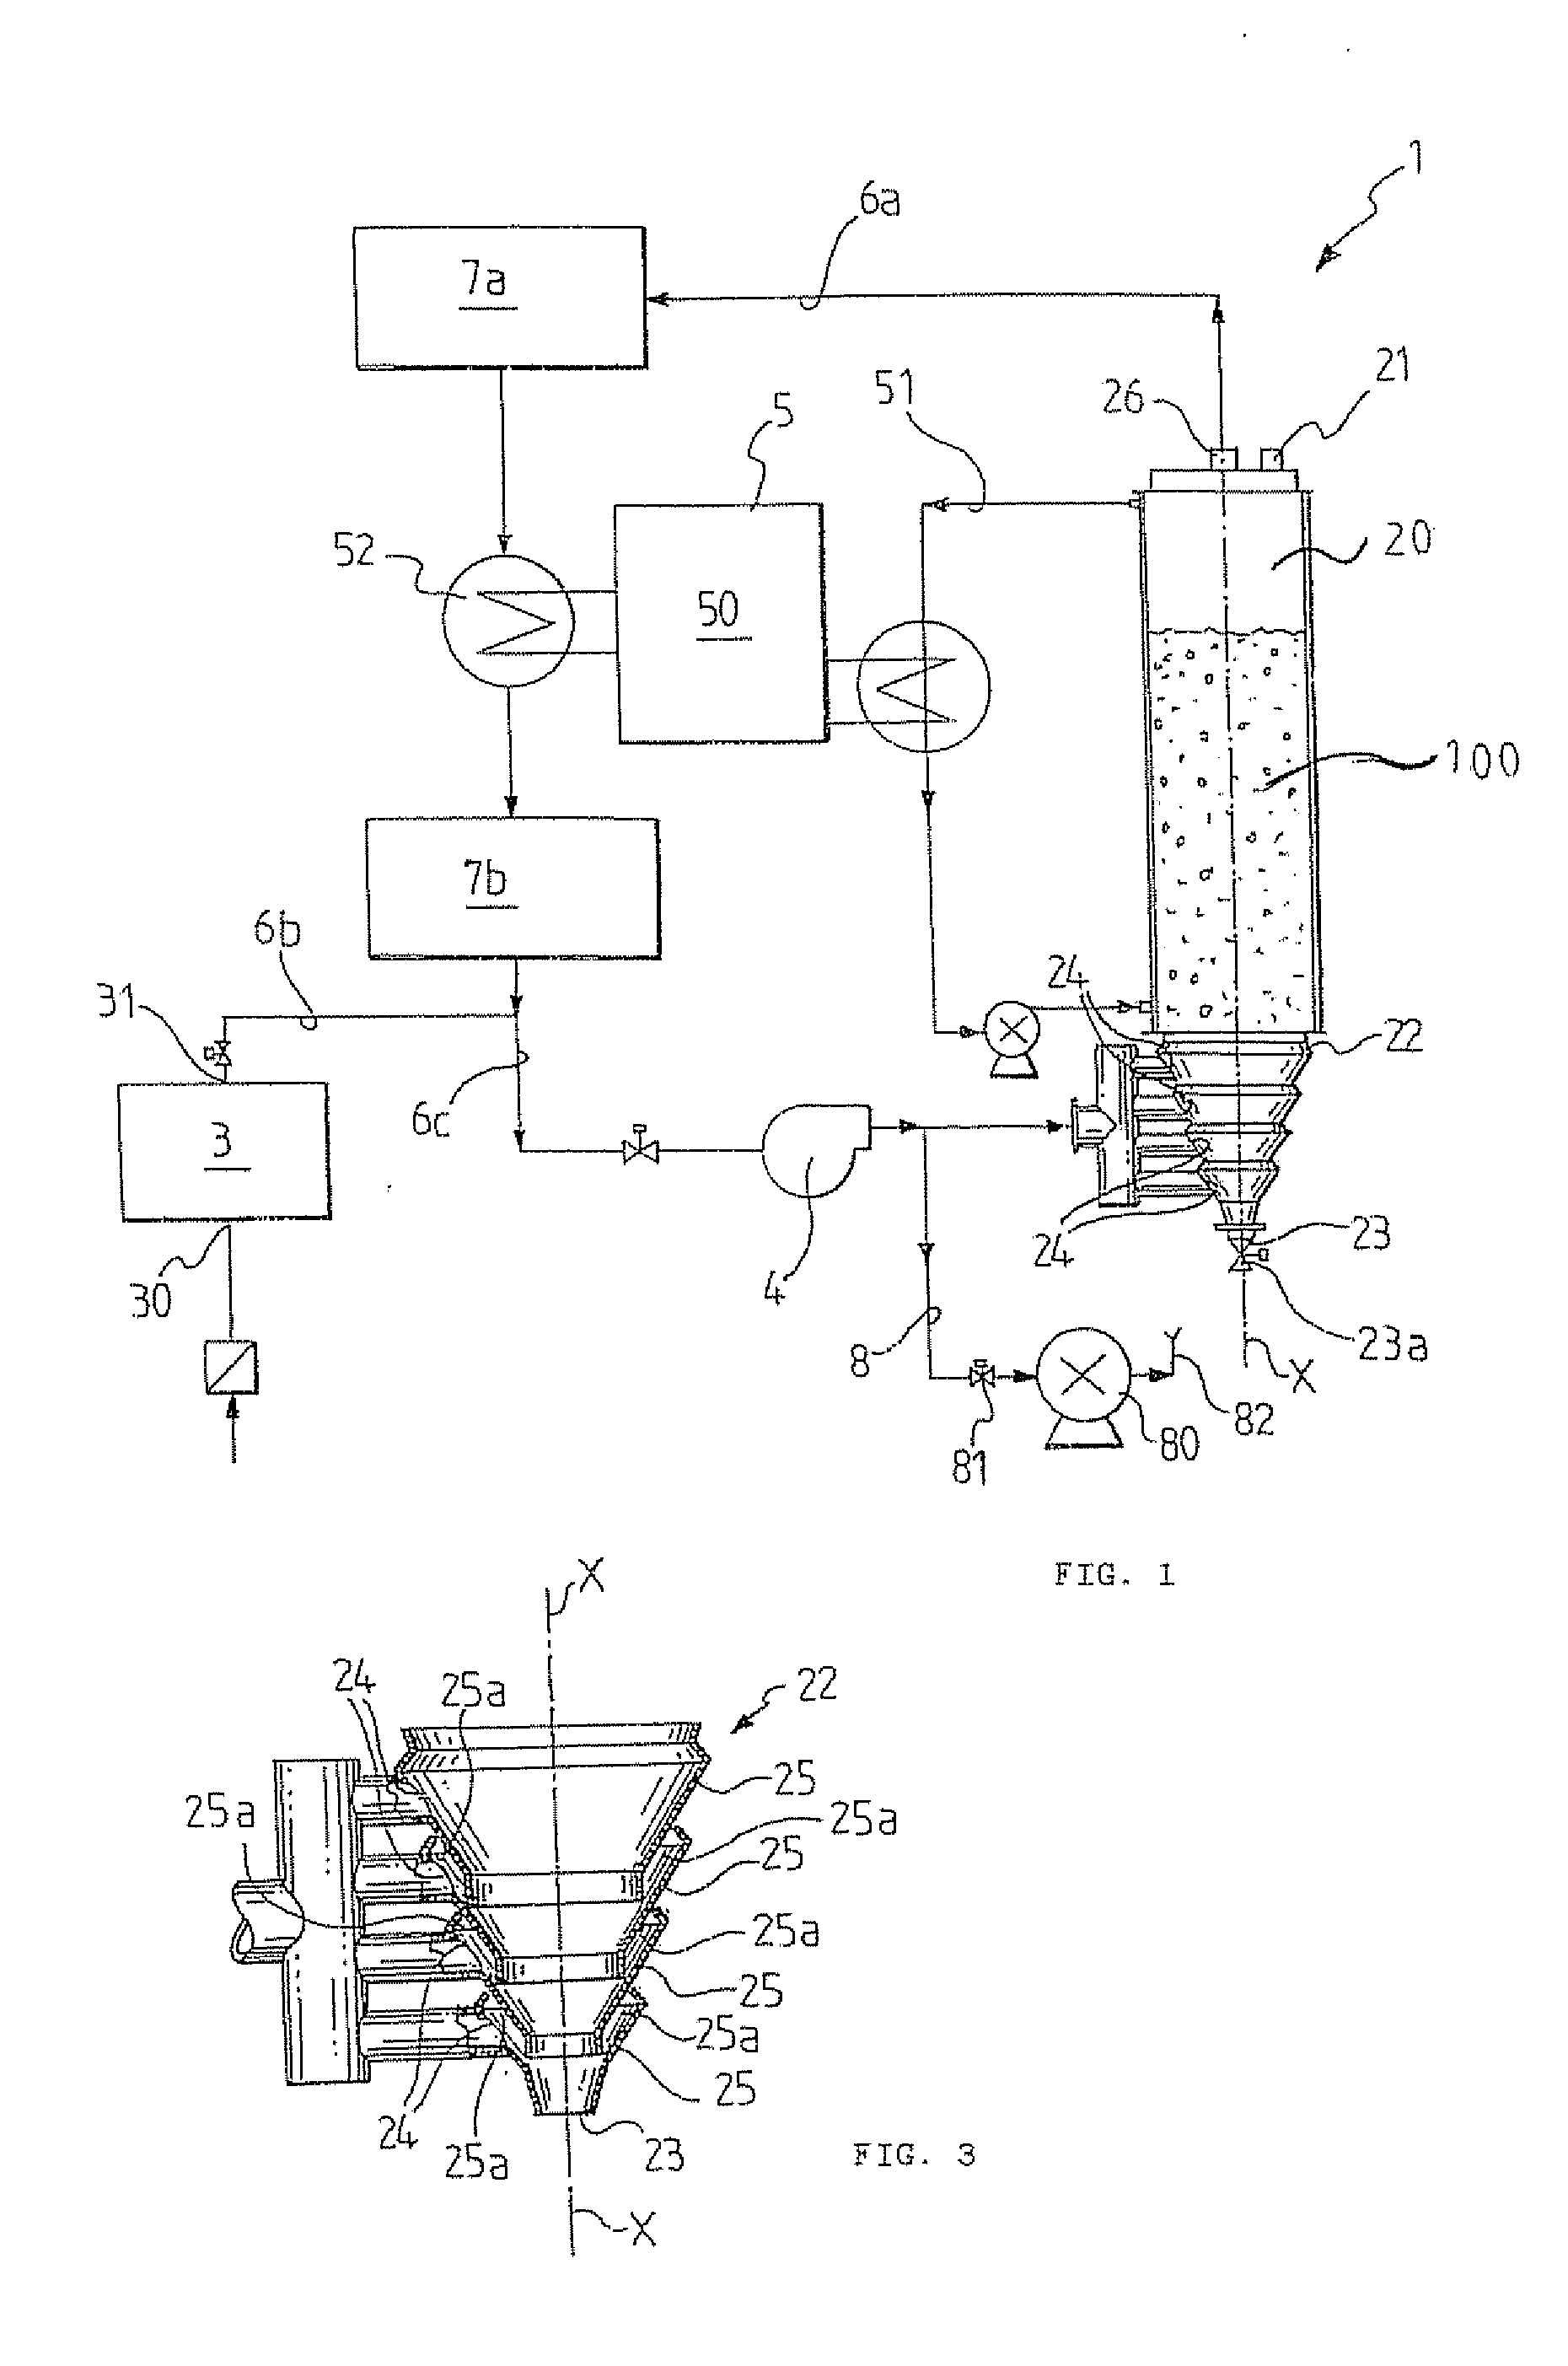 Method and apparatus for sanitizing foodstuffs contaminated with mycotoxins